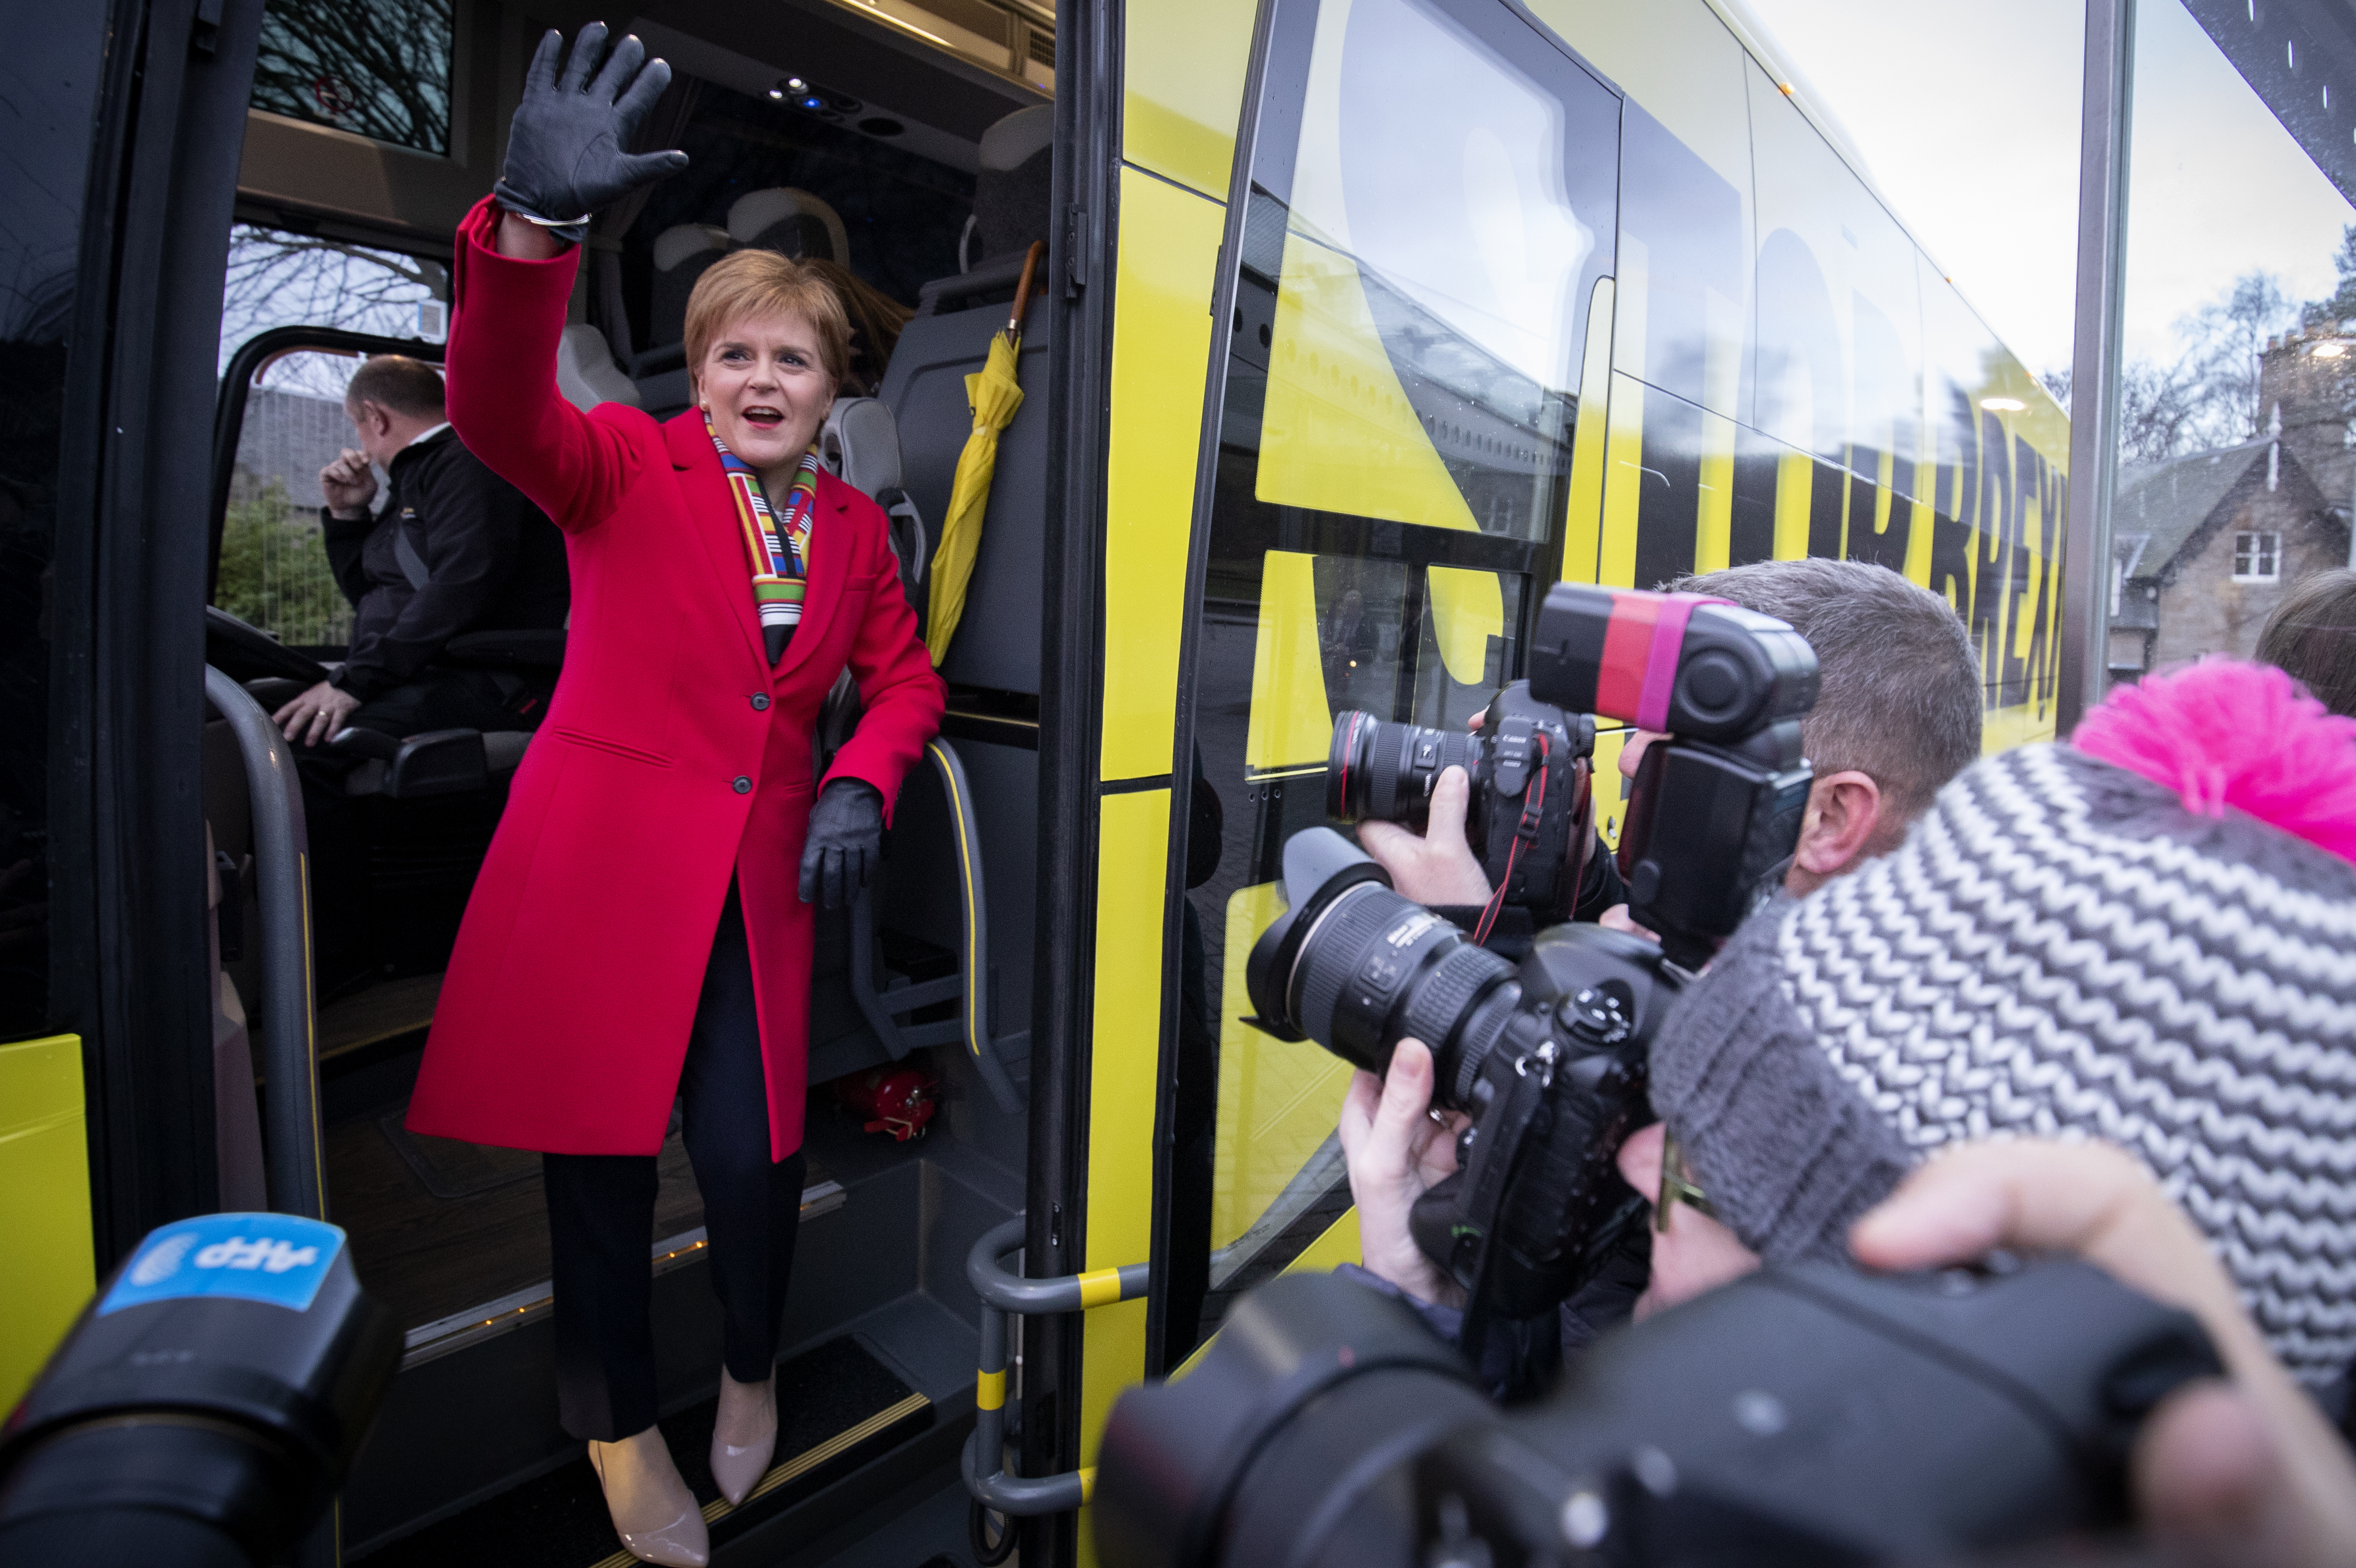 SNP leader Nicola Sturgeon boards the party's campaign bus outside the Scottish Parliament, Edinburgh, on the last day of the General Election campaign trail in 2019.